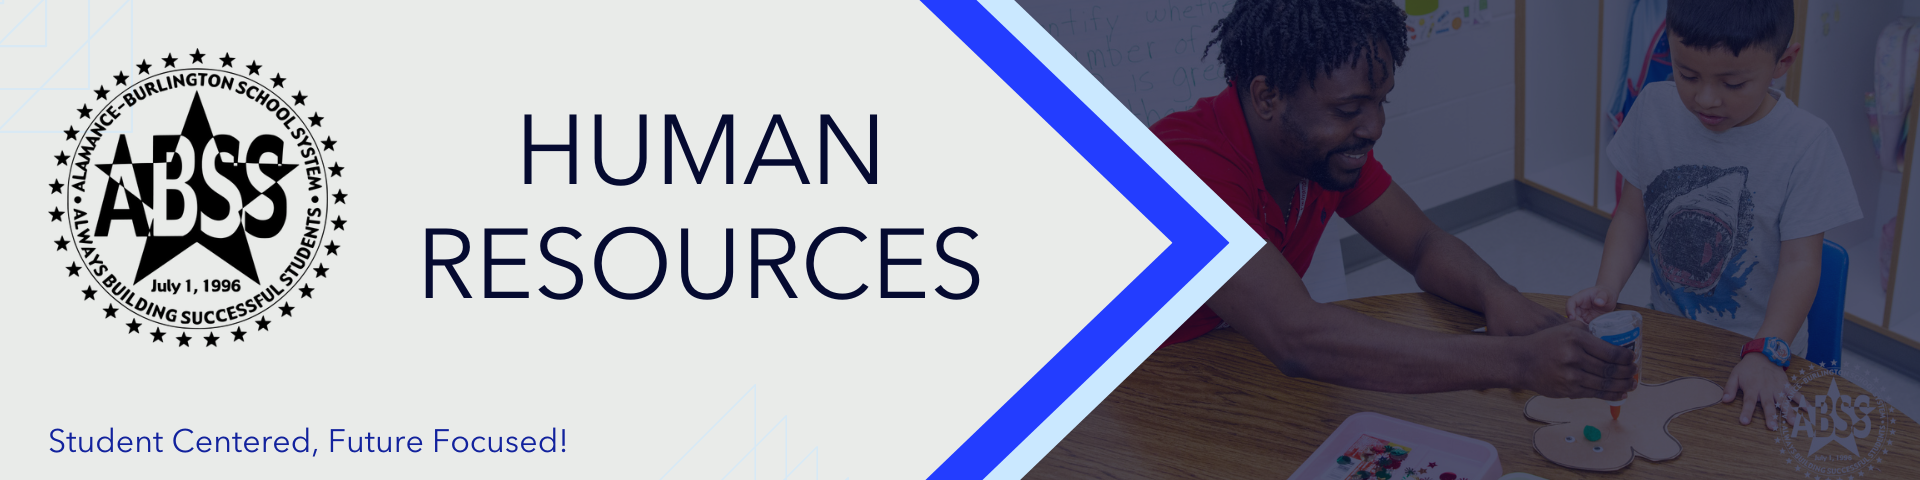 Rectangle banner with a grey background with blue highlights.  On the left is the ABSS logo and text "Human Resources" and on the right is a photo of a kindergarten teacher helping a boy assemble a gingerbread man craft